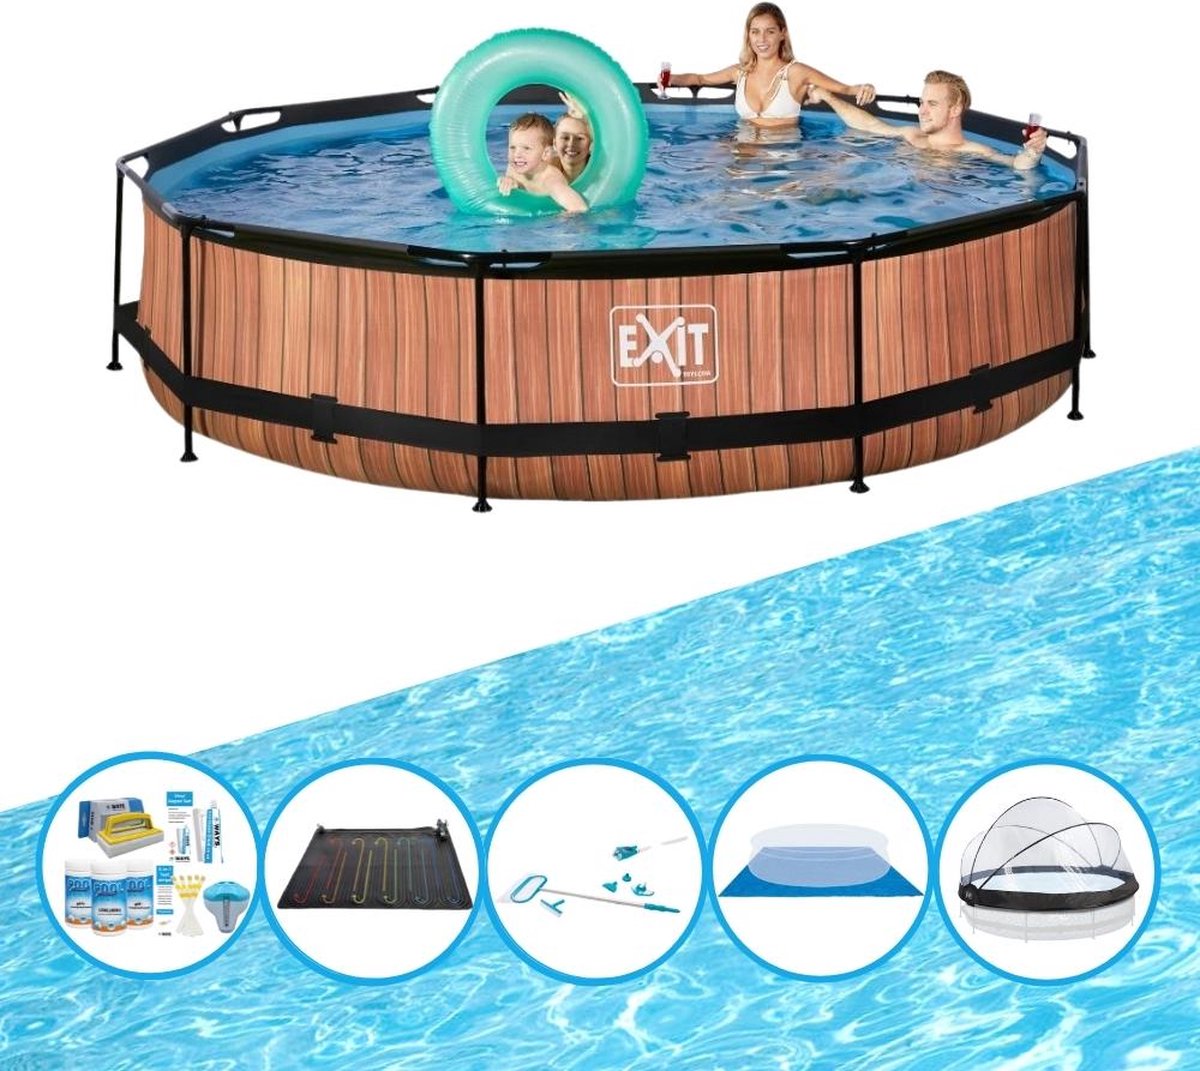 EXIT Zwembad Timber Style - ø360x76 cm - Frame Pool - Inclusief bijbehorende accessoires